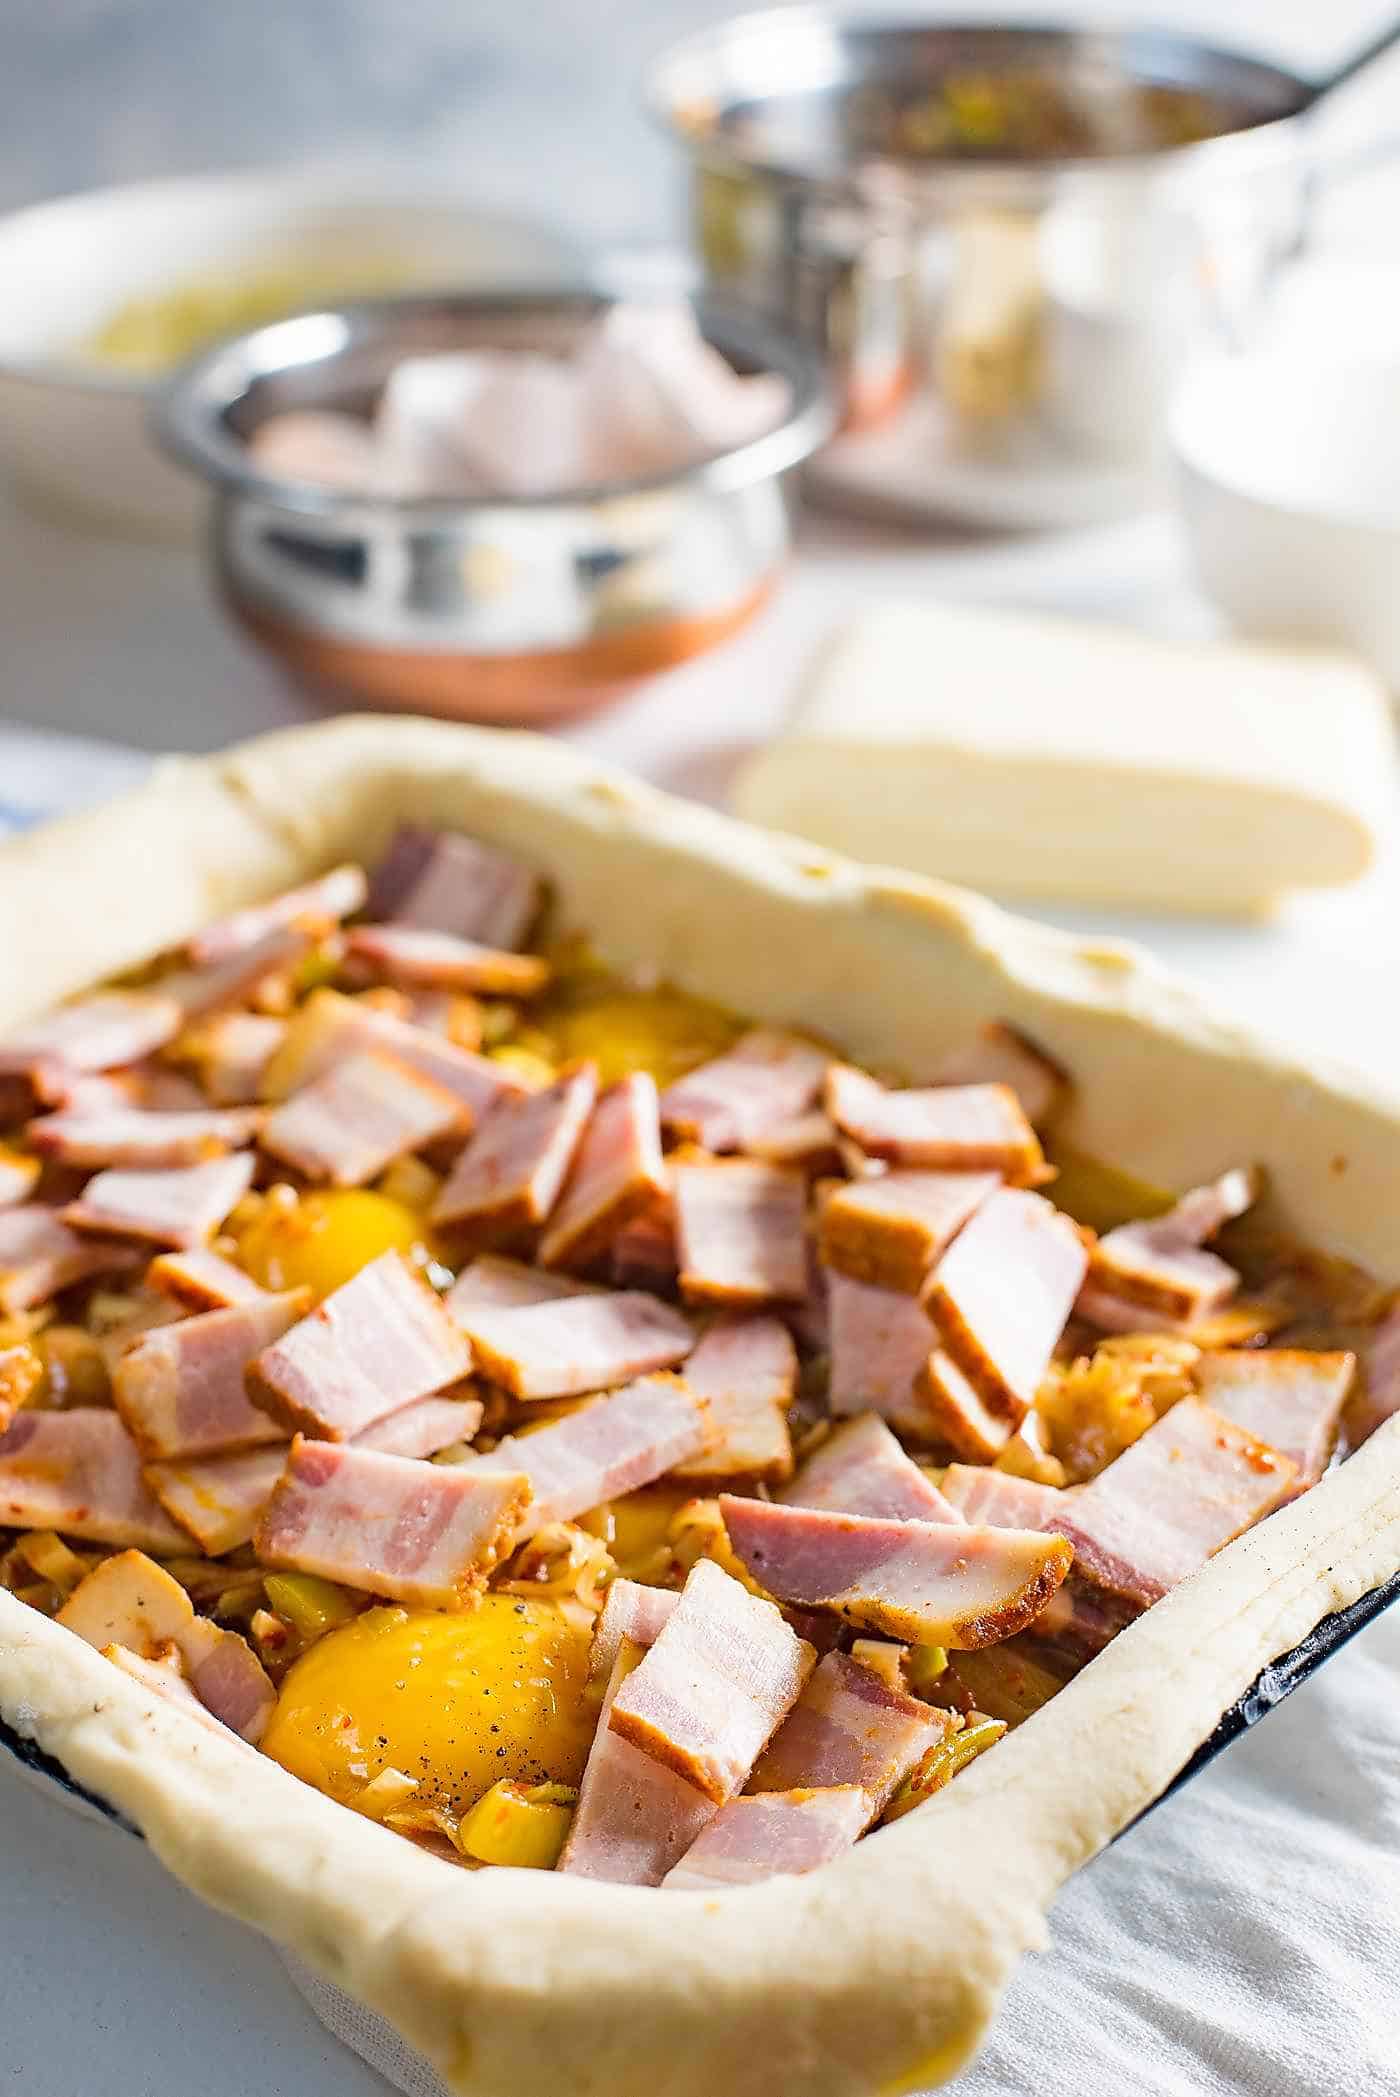 Make sure you have nice, thick cut bacon to add to the pie. Chunks of Bacon in every bite makes this bacon and egg pie more satisfying. 